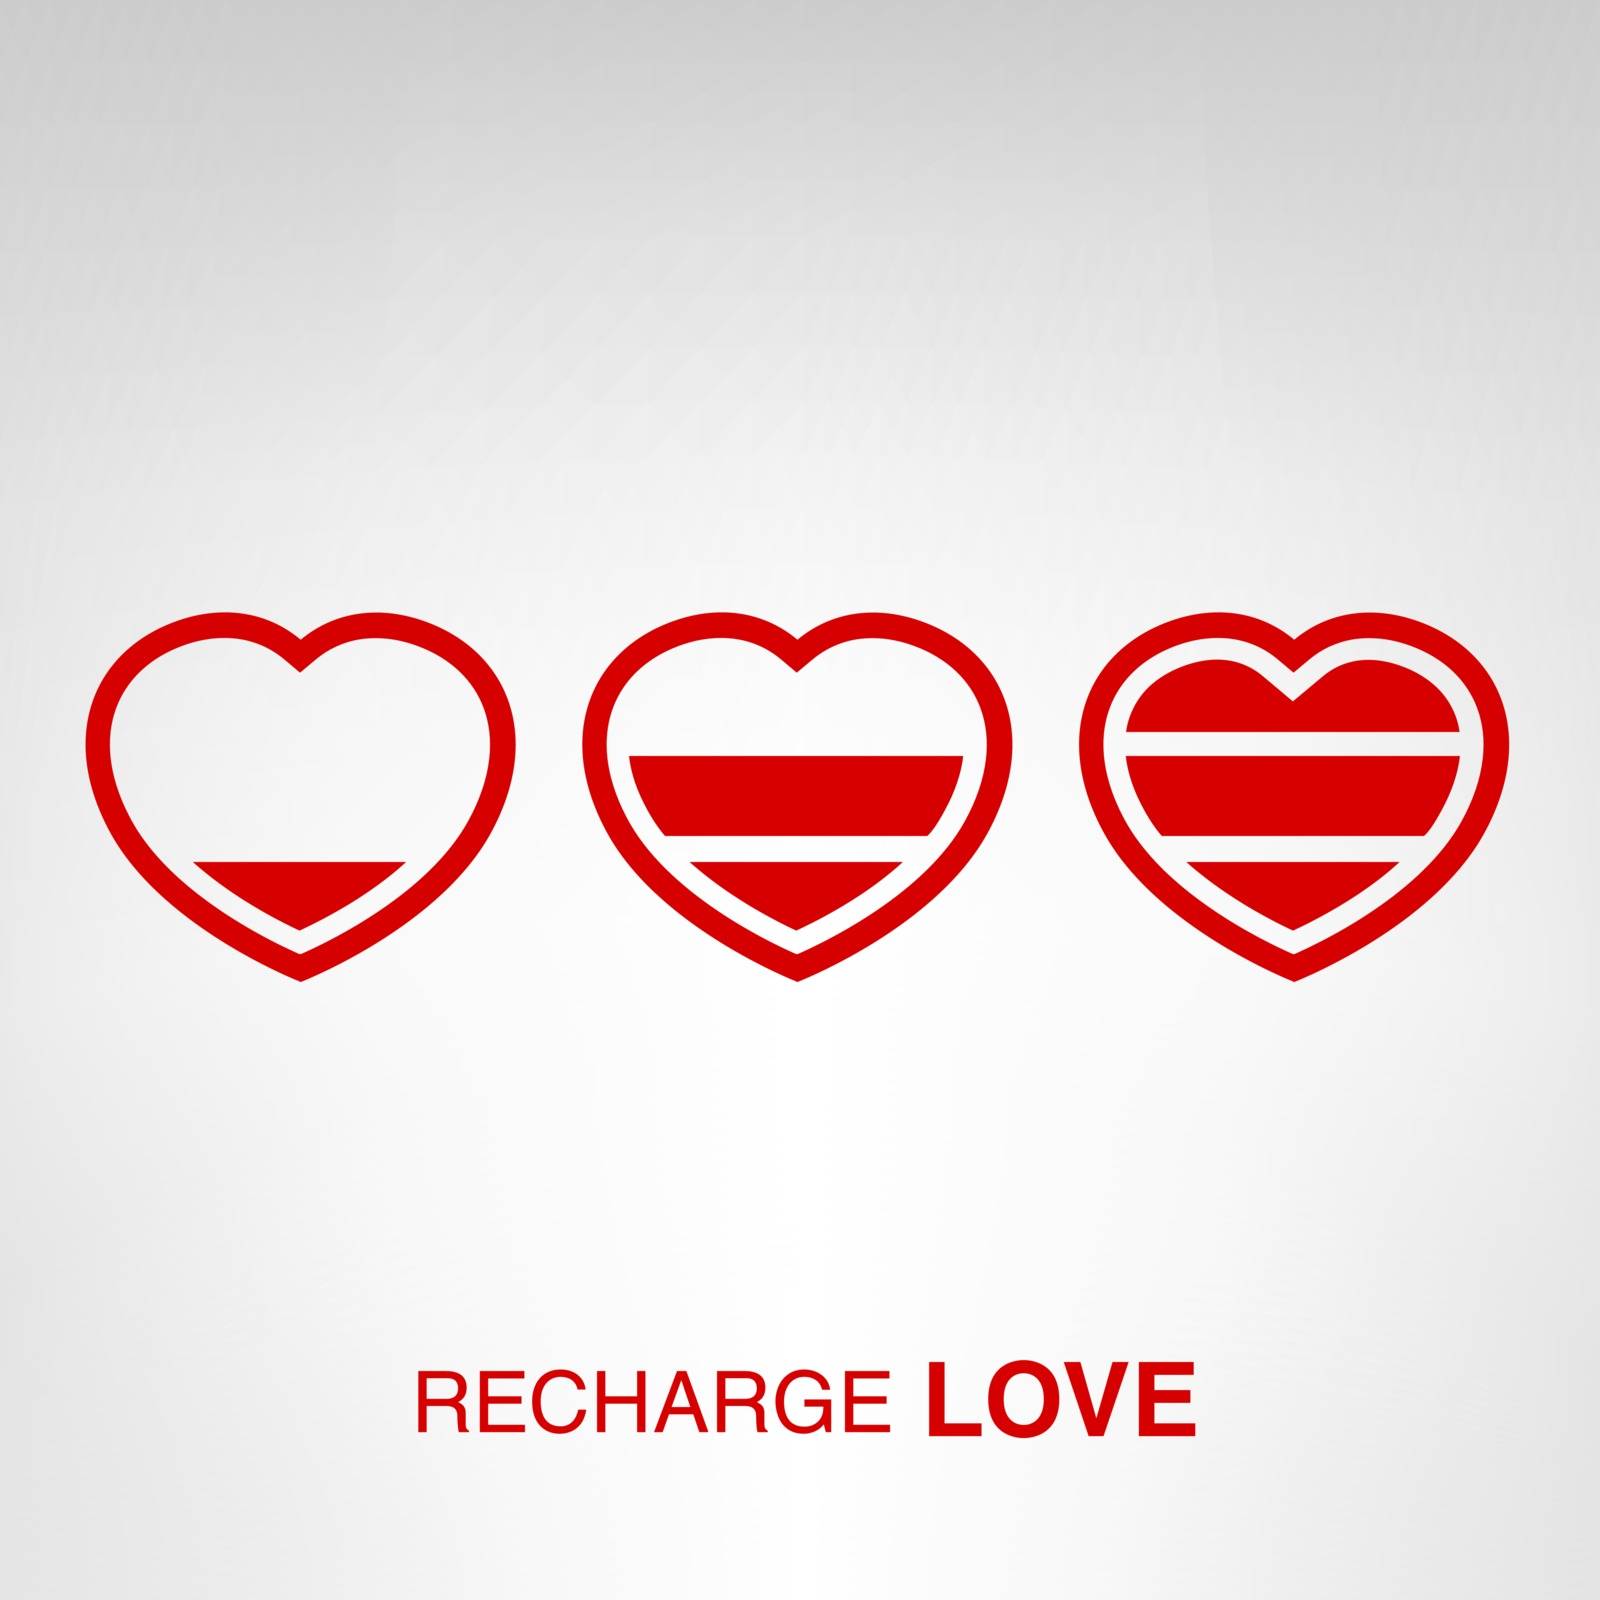 Love charger - creative Valentines Day heart concept